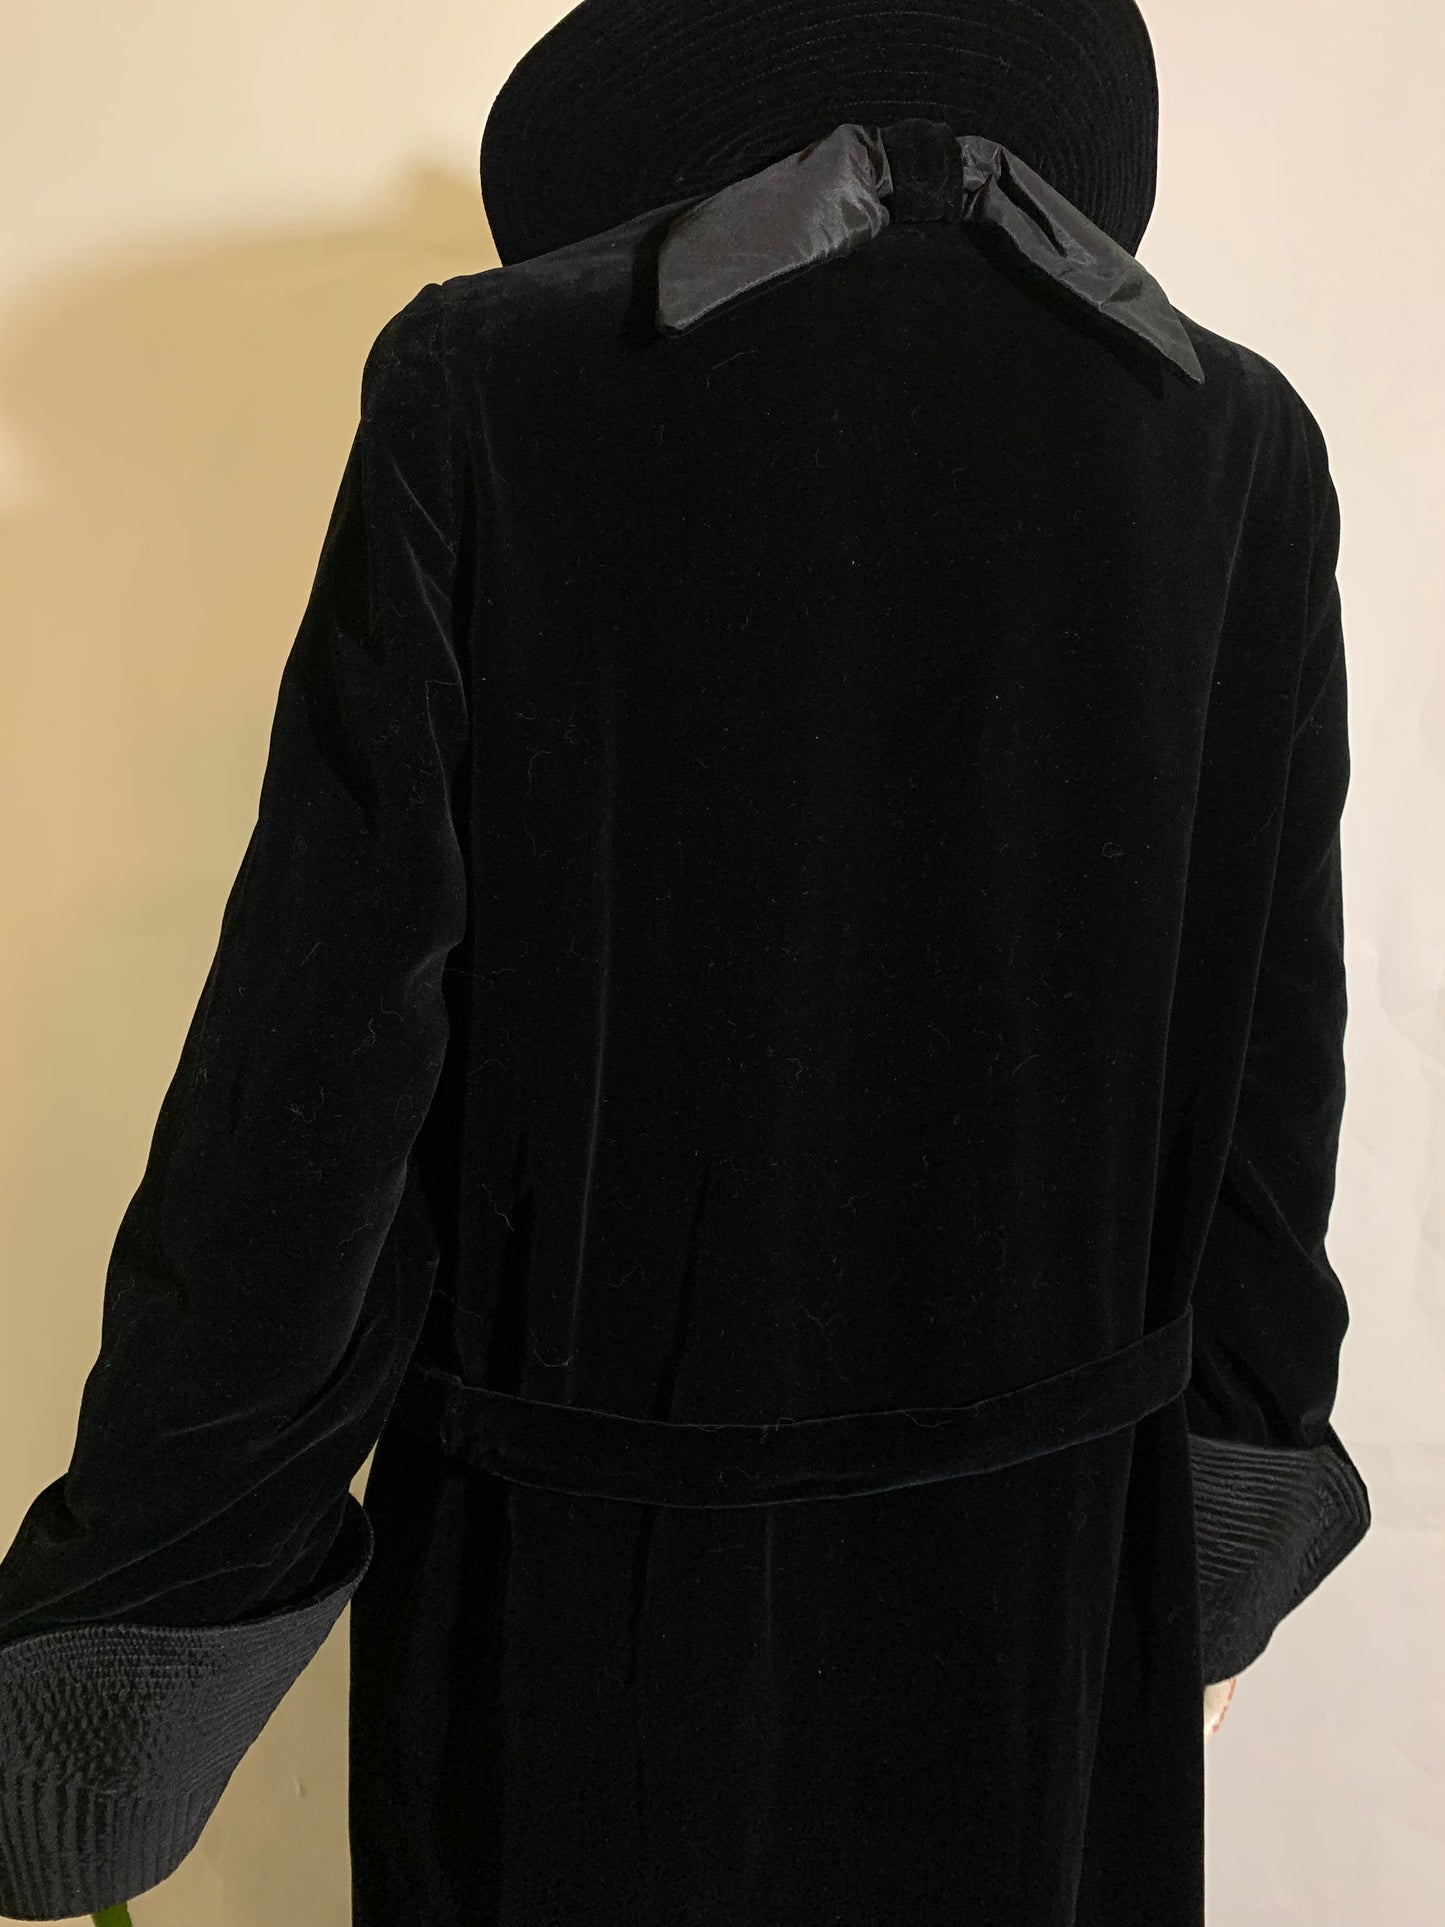 Ebony Black Cotton Velvet Coat with Trapunto Stitched Silk Stand Up Collar and Wide Cuffs circa Early 1900s